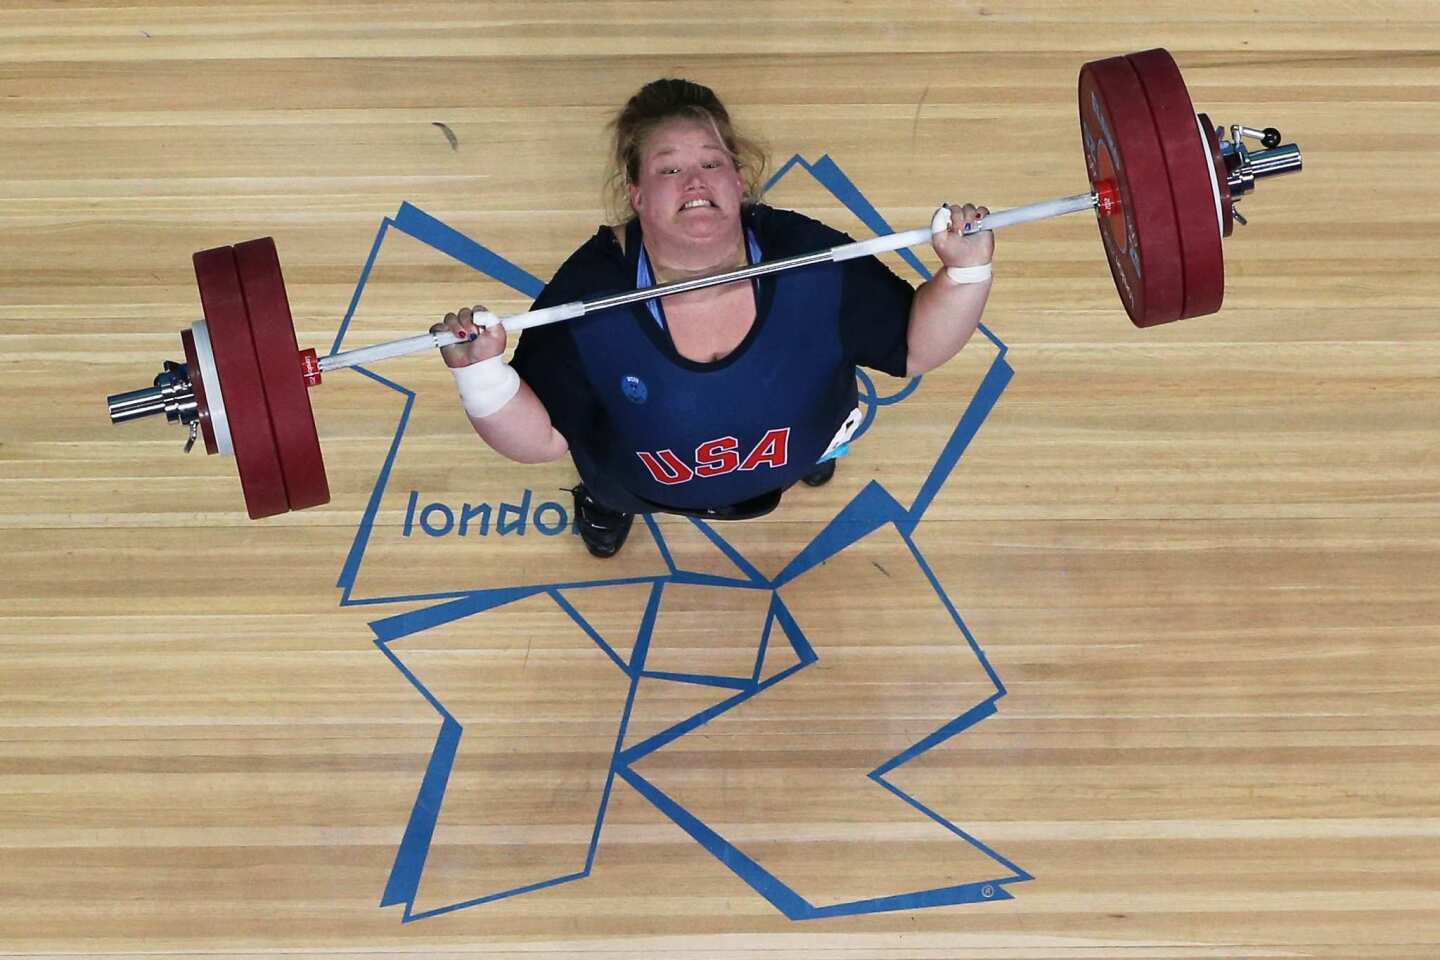 Holley Mangold of the United States competes during the women's +75kg weightlifting at the London 2012 Olympic Games.